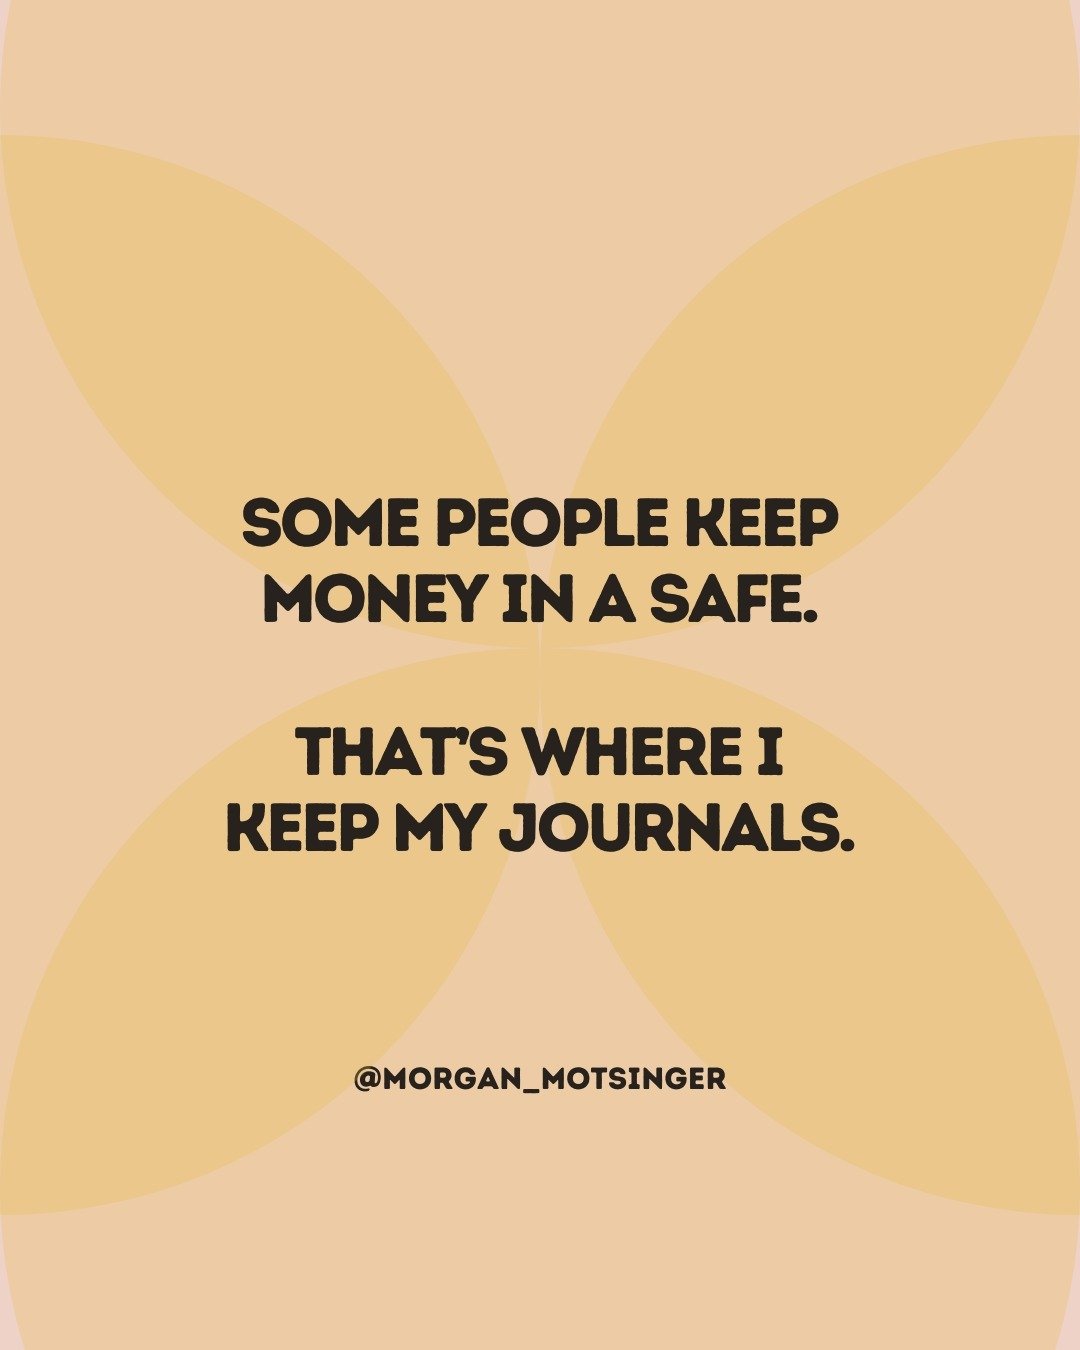 I have a plan in place for my sister to burn my journals if I ☠️ before anyone can read them.

My fear that someone would find and read my journals kept me from being honest on paper for a long time. 

I mean, what would happen if people really knew 